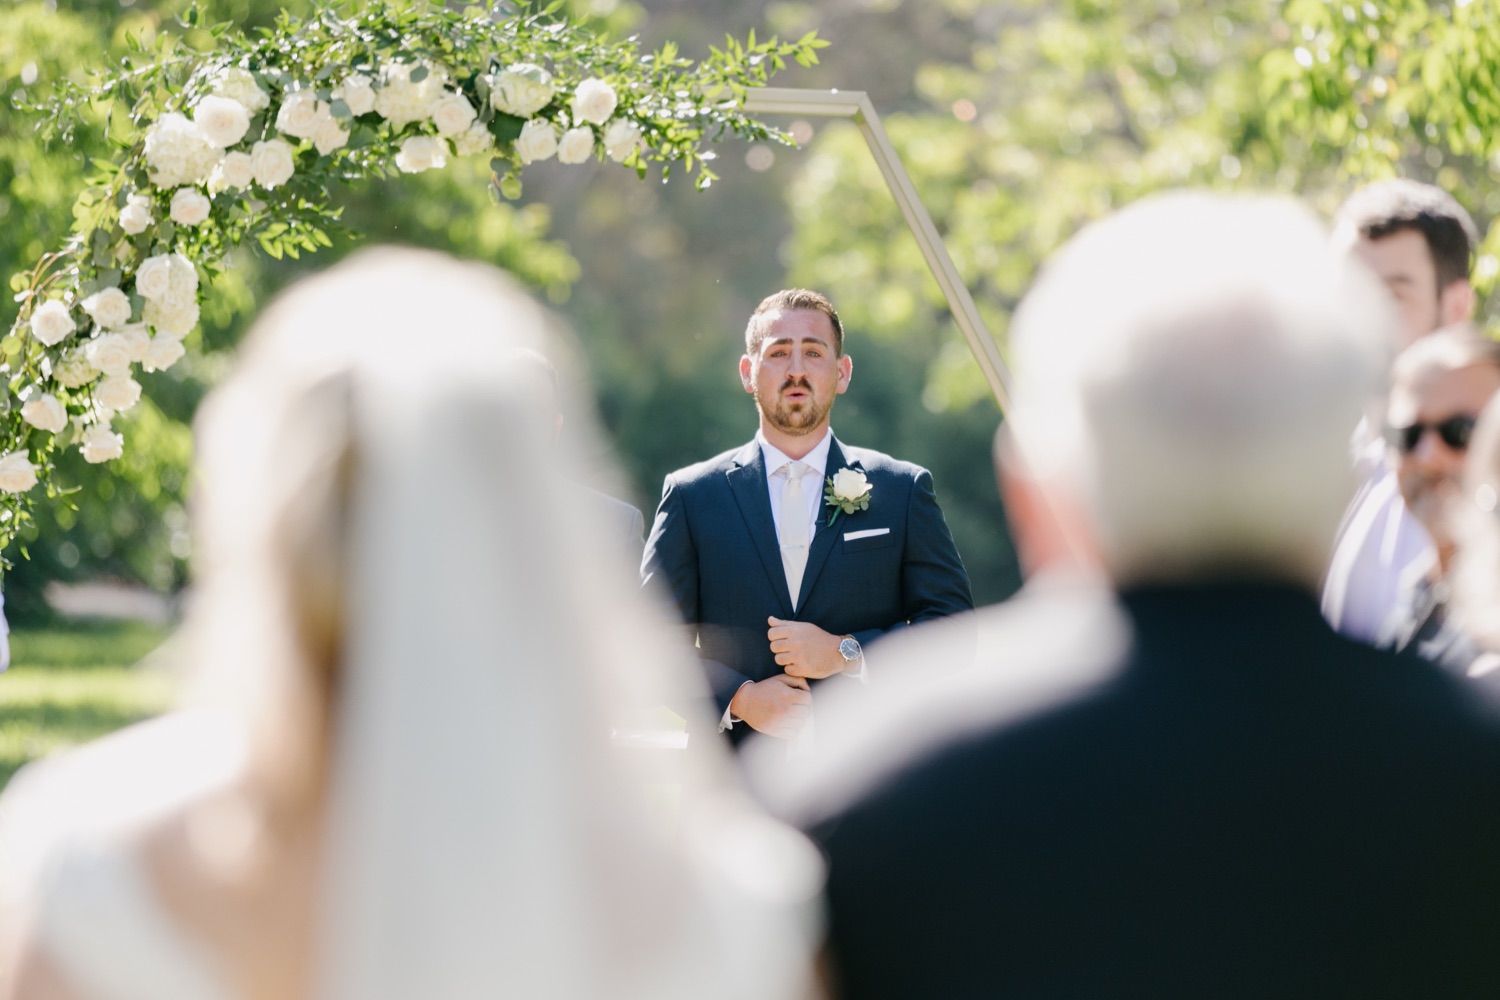 Groom getting emotional as he sees his bride walk down the aisle for the first time at walnut grove wedding